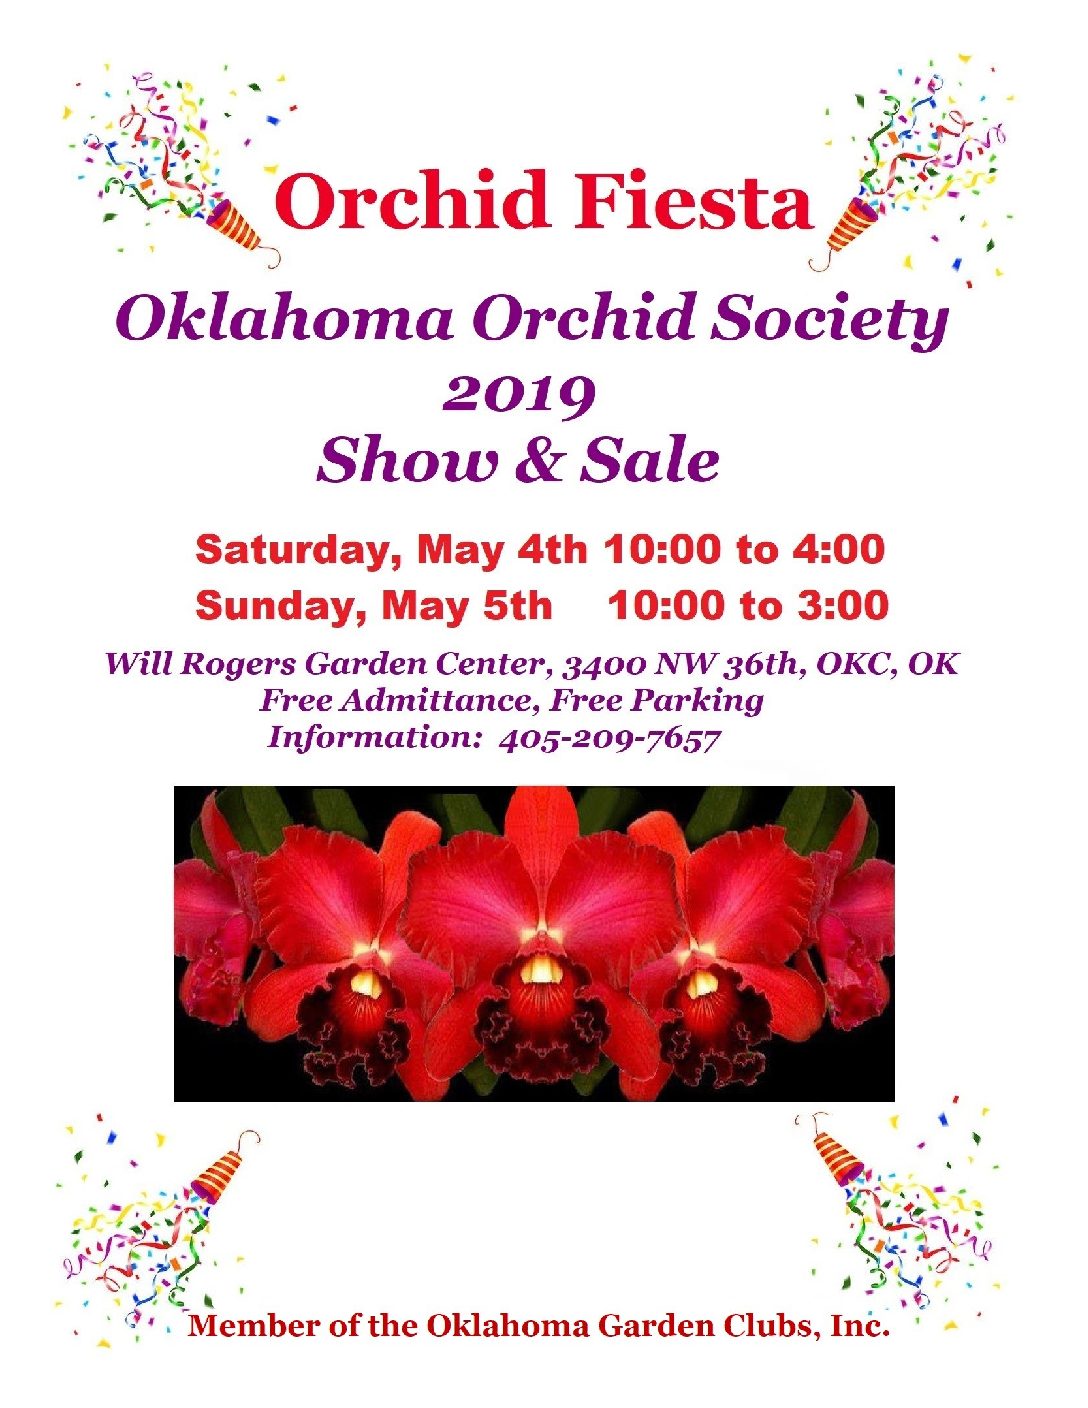 Houston Orchid Society Show and Sale hosting SWROGA